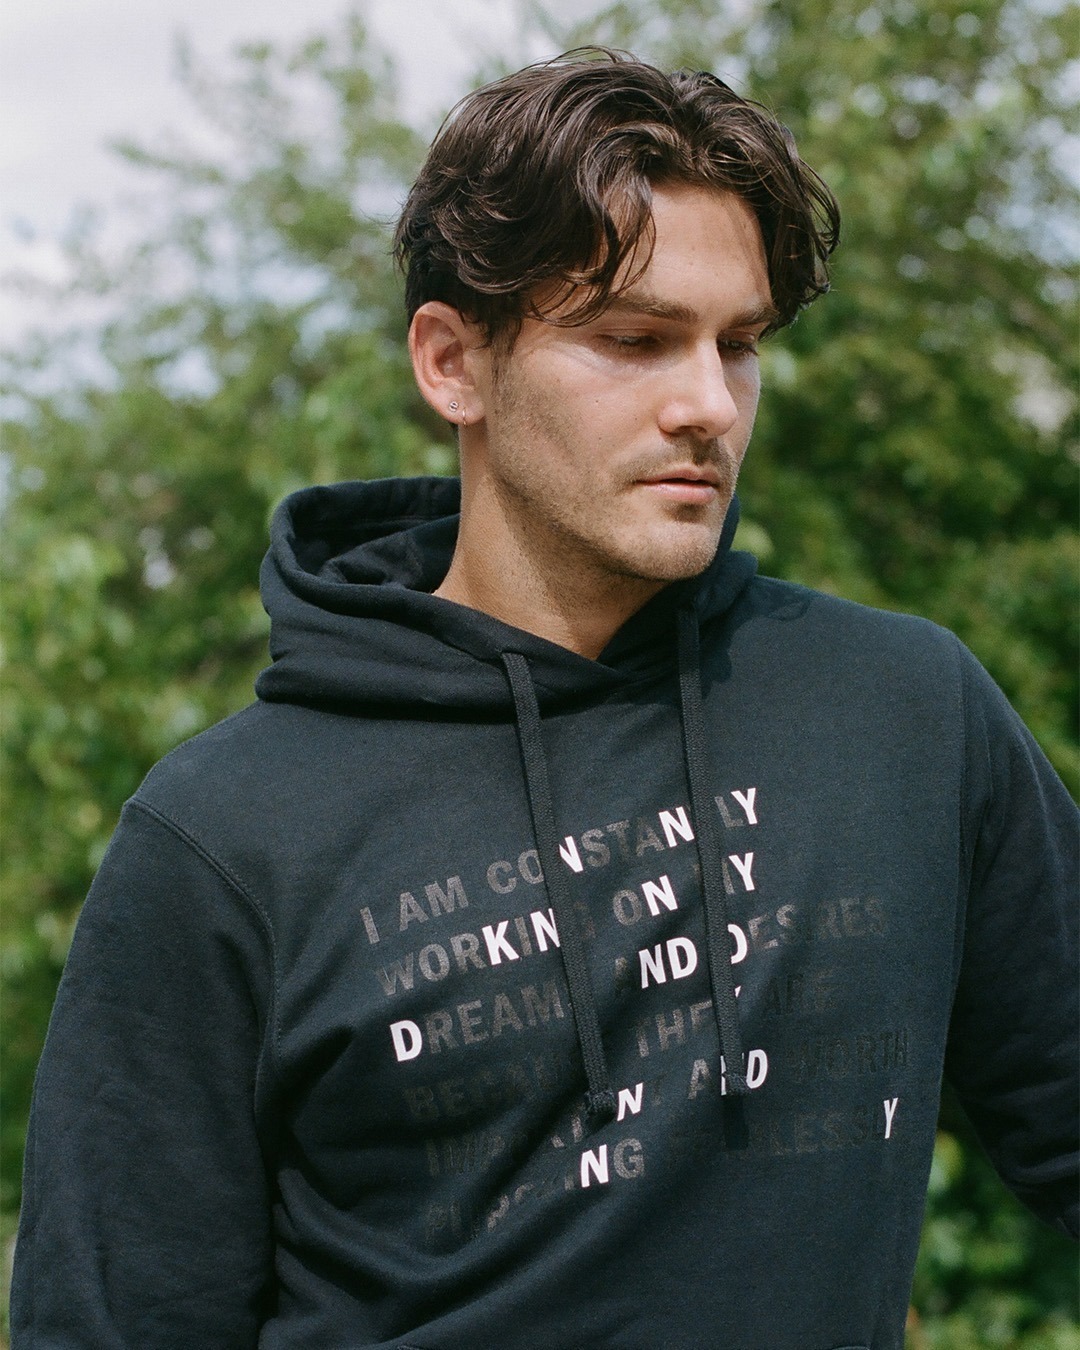 DKNY - Artist @Edward__Granger shares his state of mind in his #DKNYSTATEOFMIND Hoodie: “I am constantly working on my dreams and desires because they are important and worth pursuing fearlessly”.